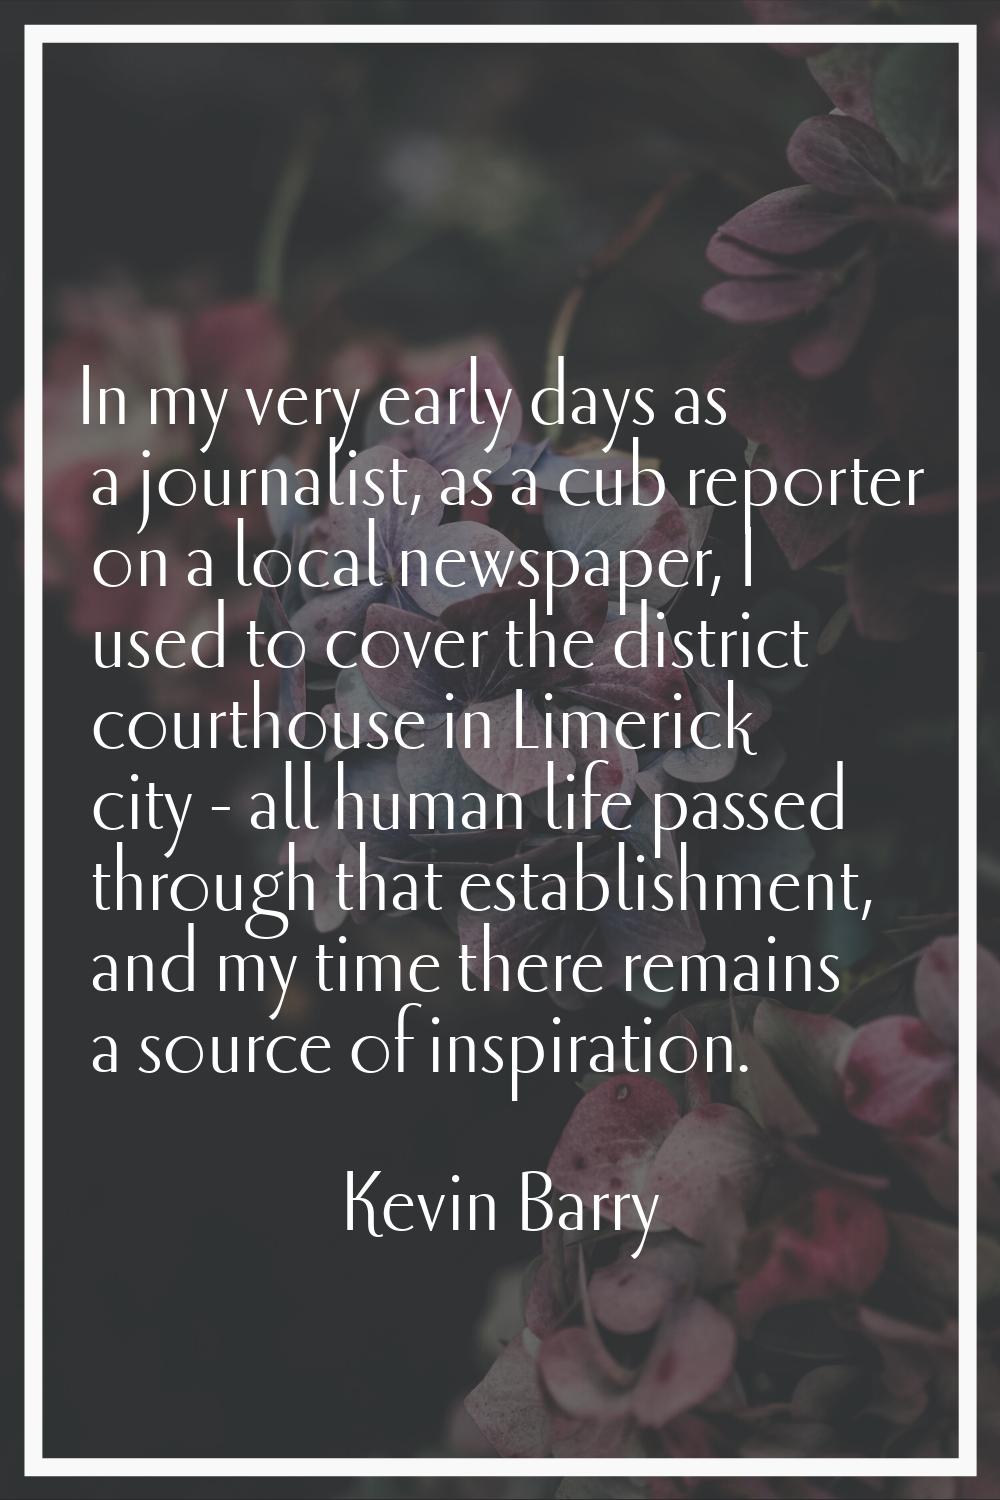 In my very early days as a journalist, as a cub reporter on a local newspaper, I used to cover the 